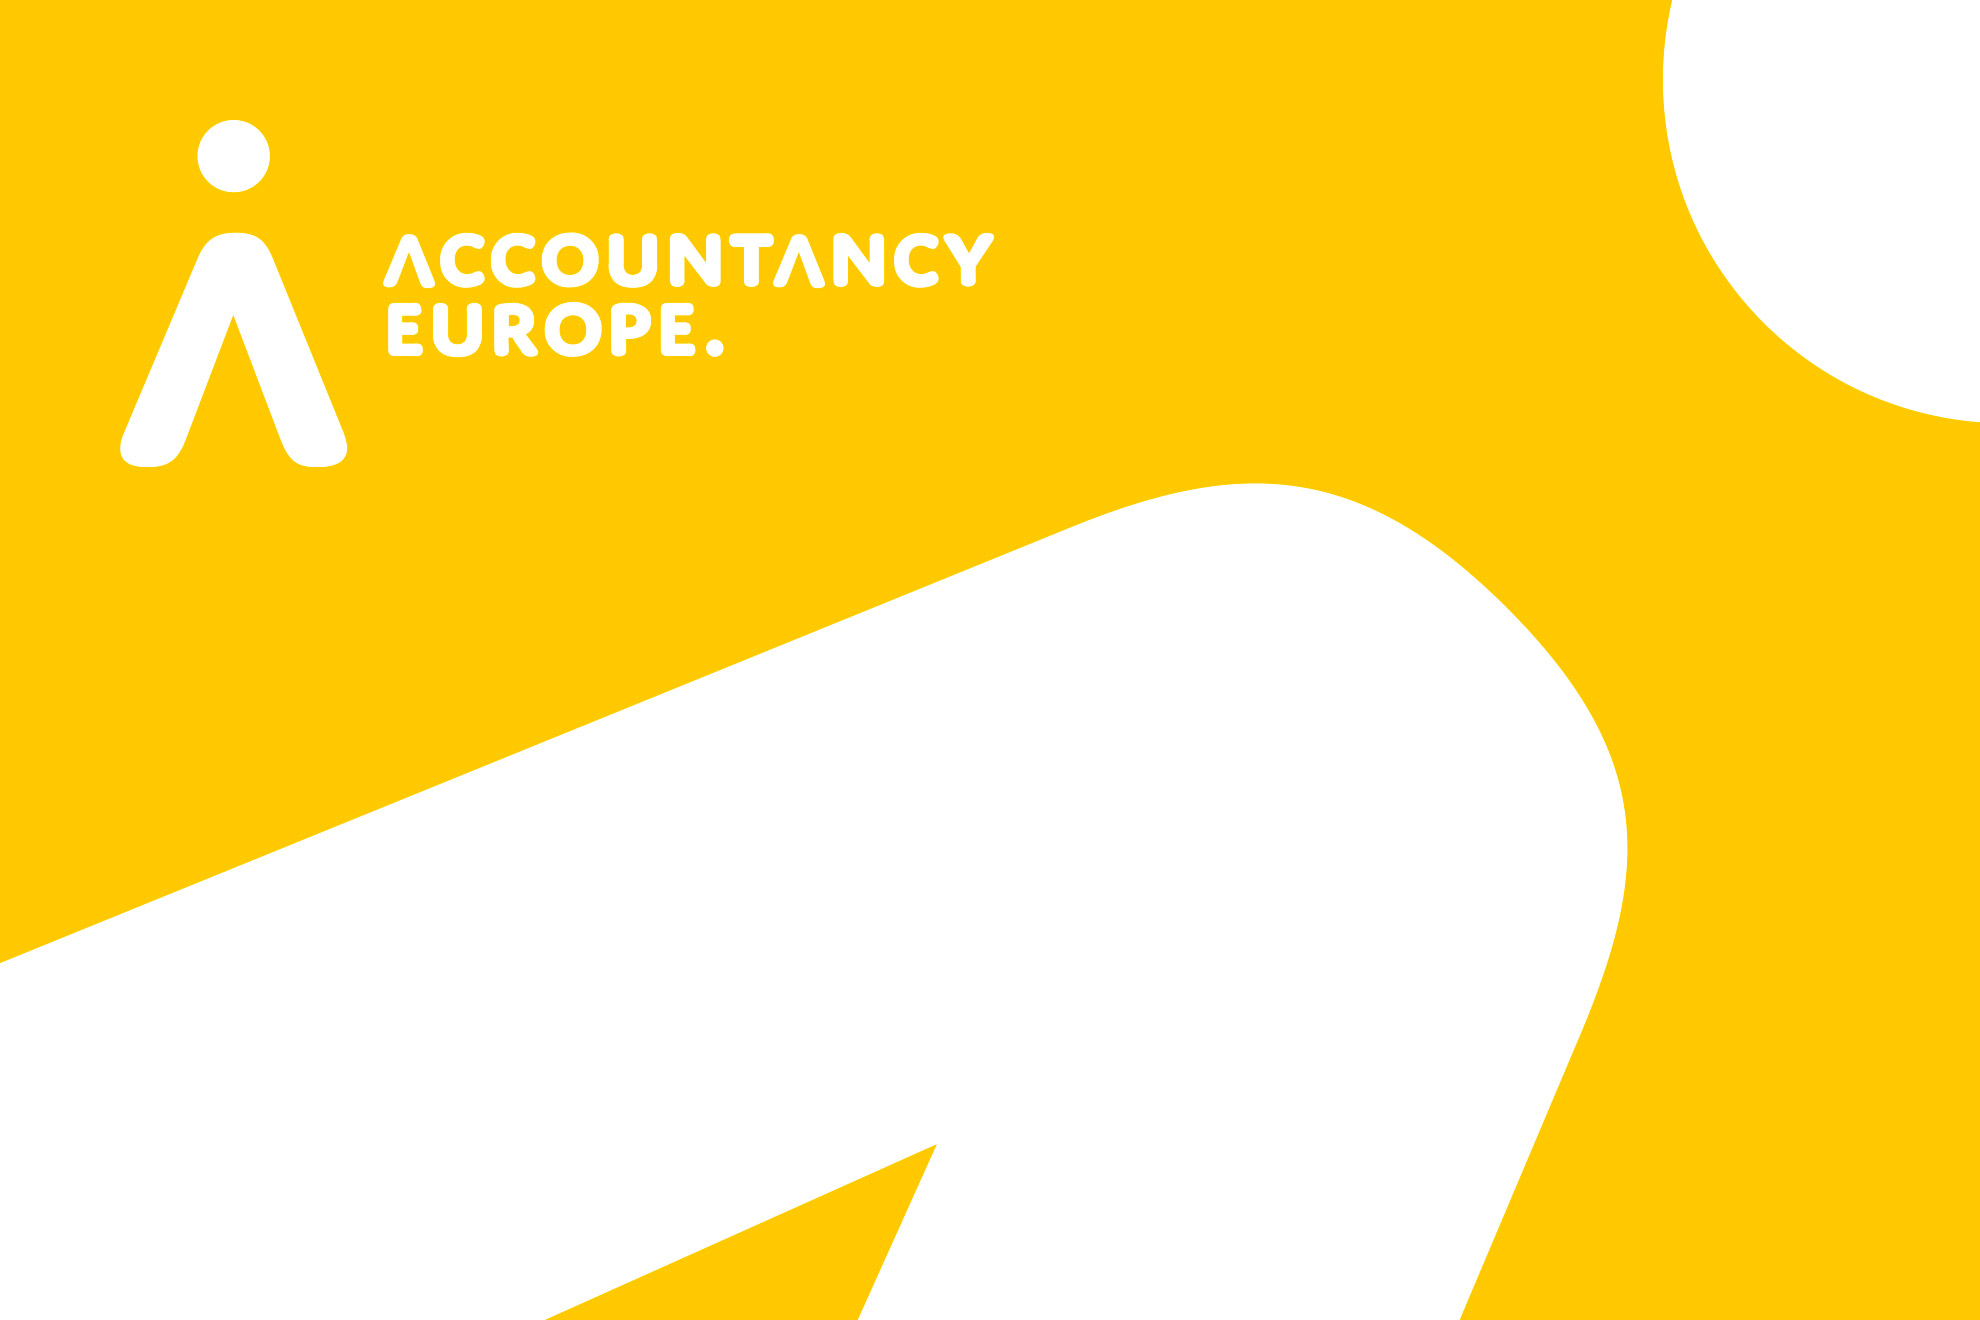 European Accountants call for a specific international standard on sustainability assurance